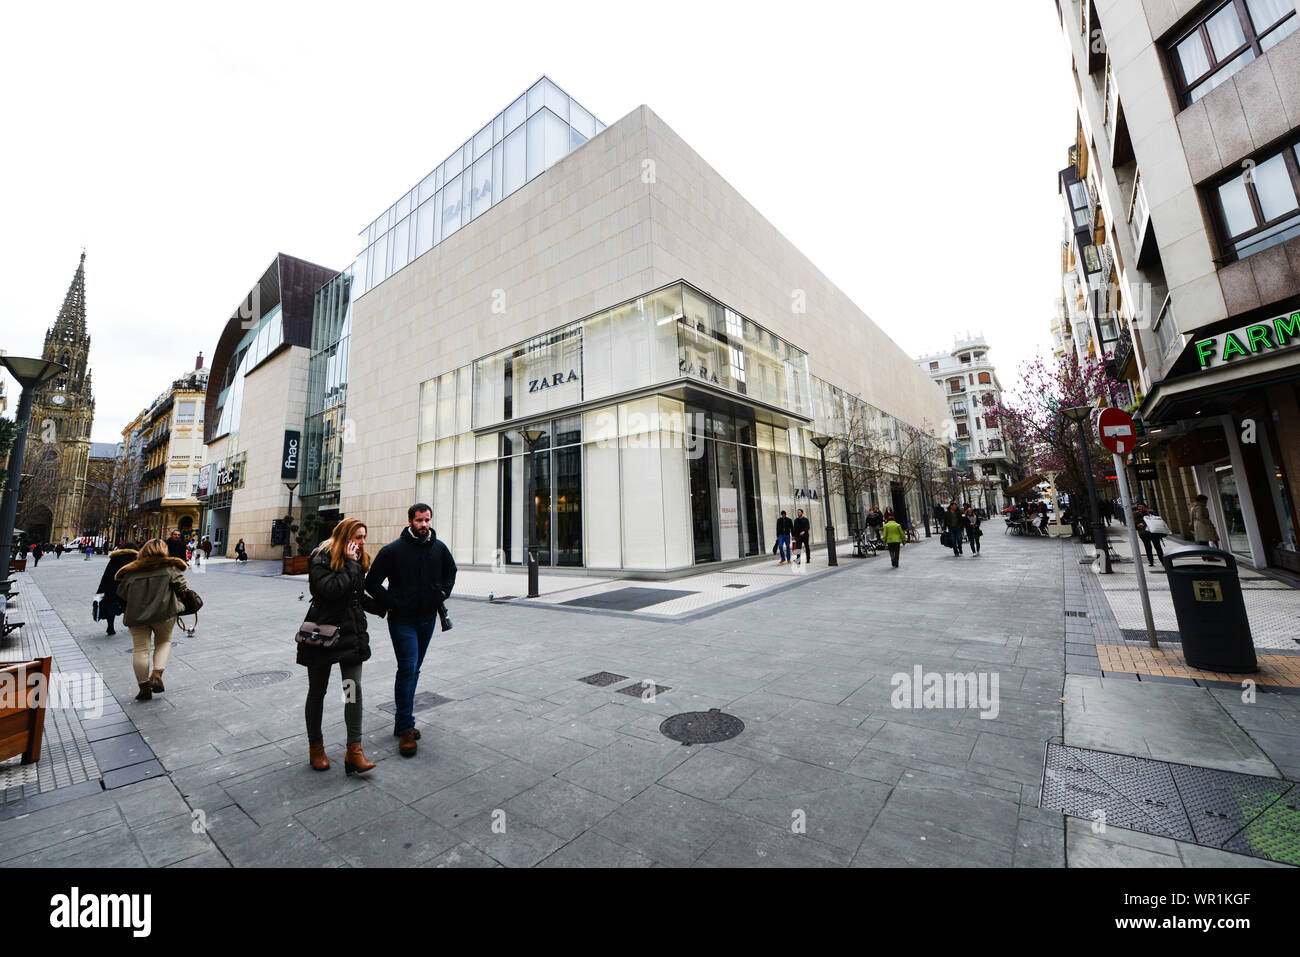 Zara Shop Spain High Resolution Stock Photography and Images - Alamy